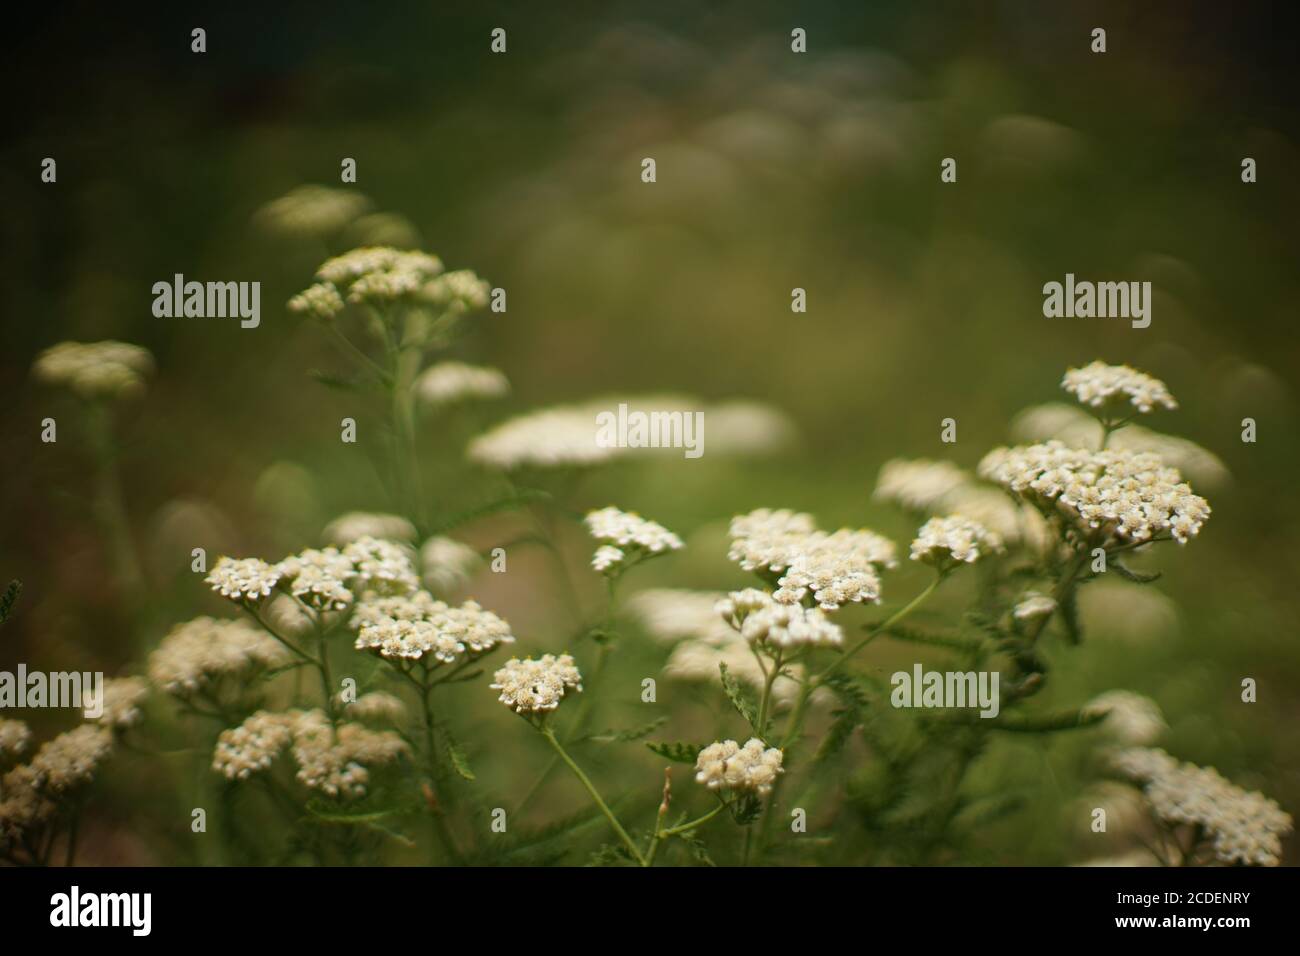 Yarrow plant with white flowers grows in the summer garden Stock Photo